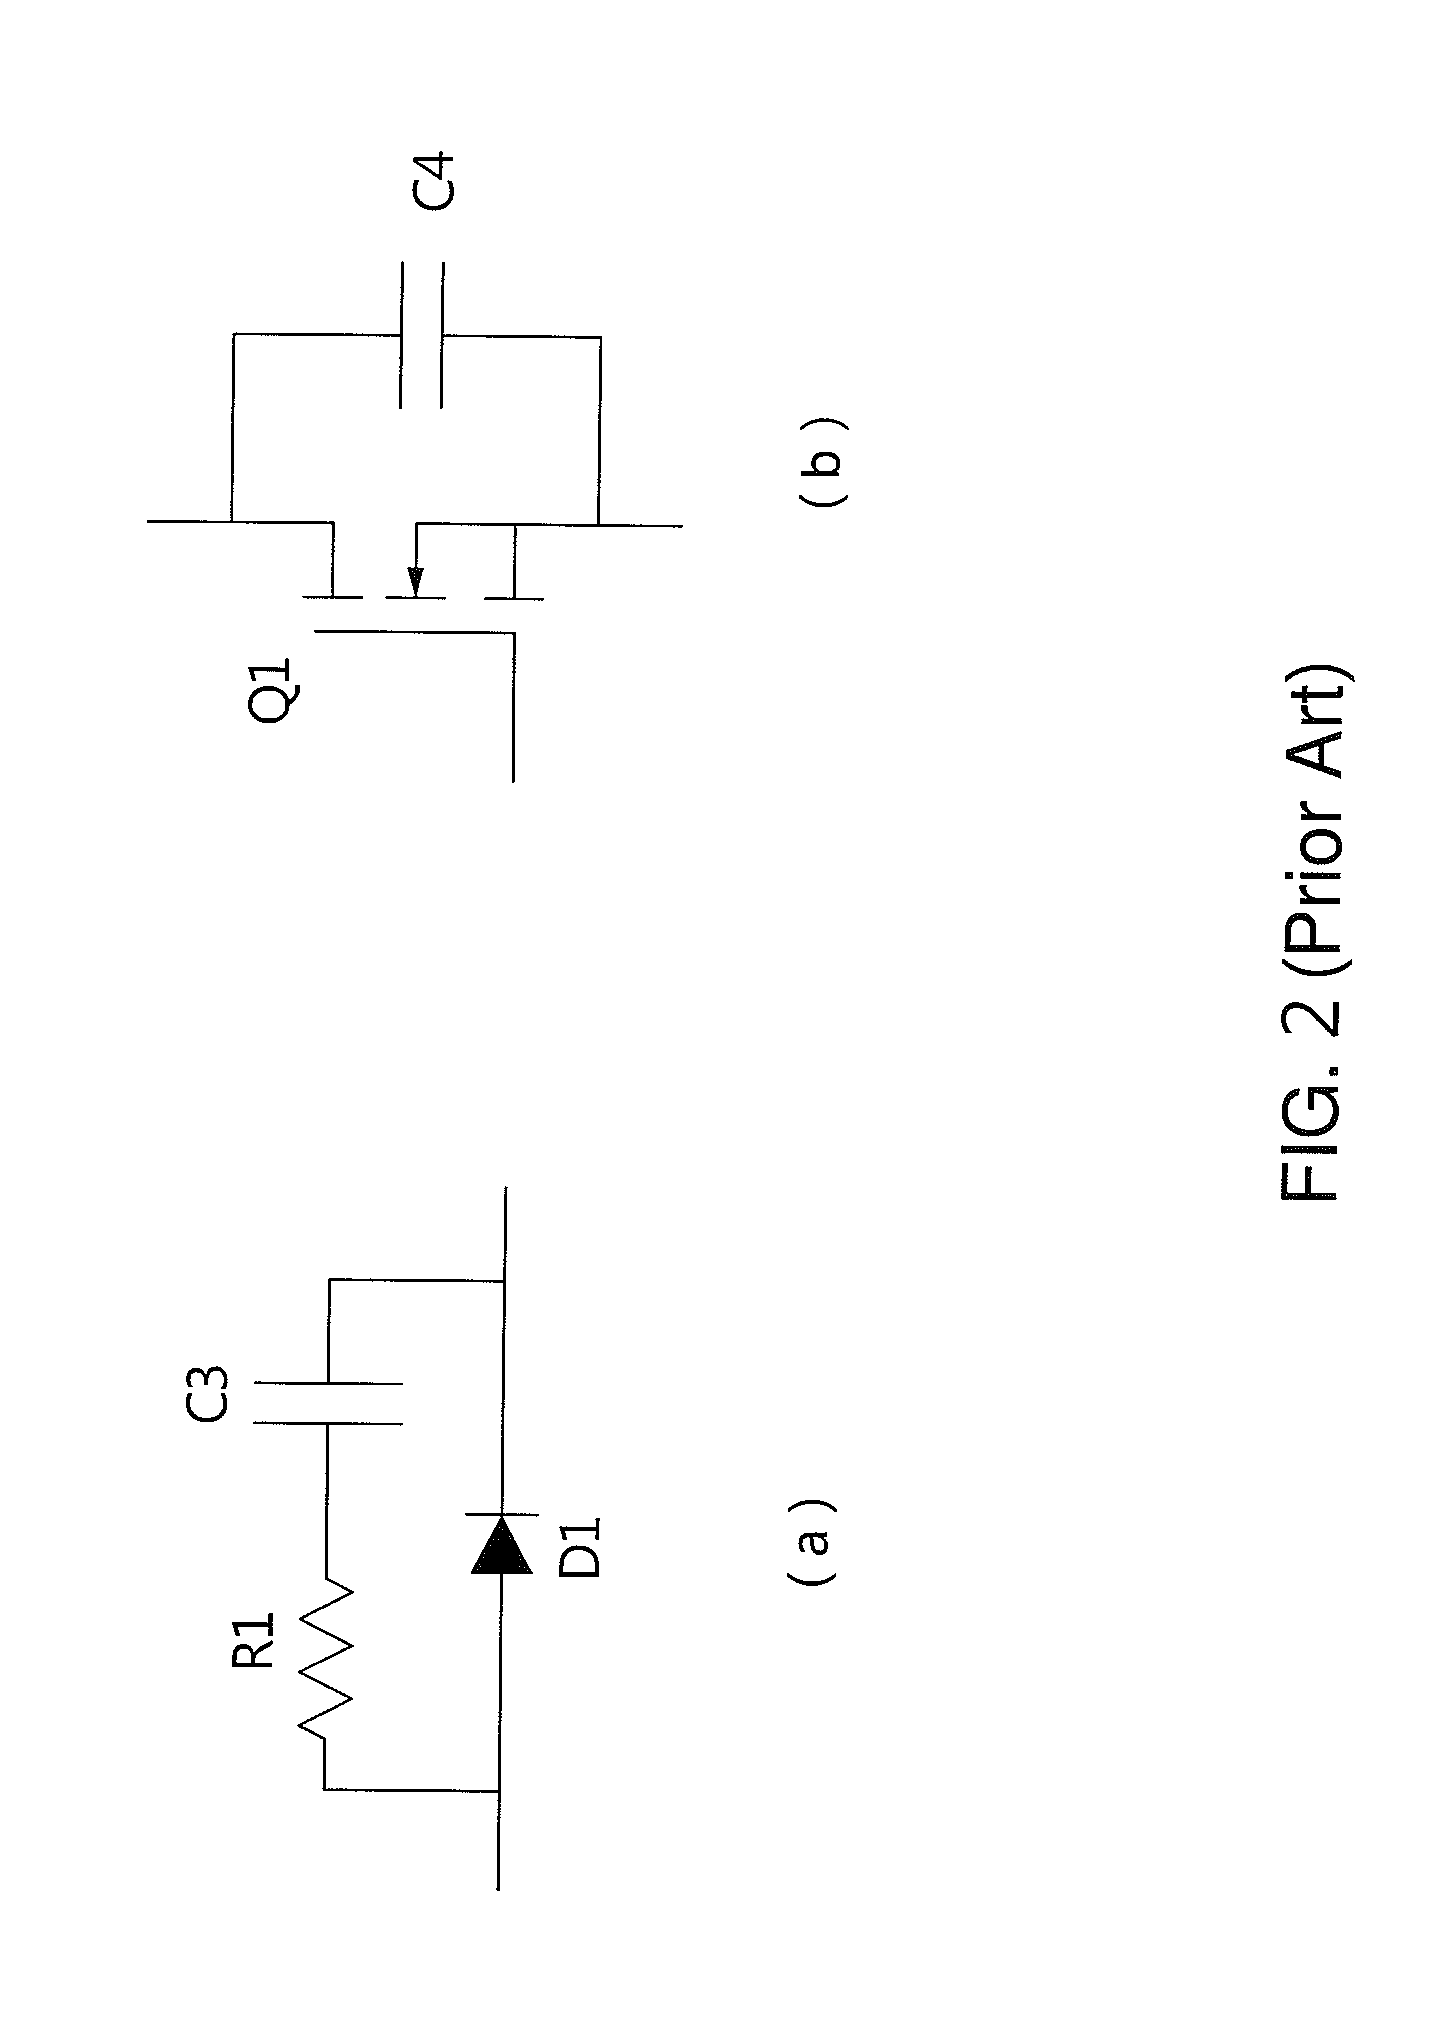 Switched-Mode Power Supply Capable of Catching Radiated Electromagnetic Interference and Using its Energy